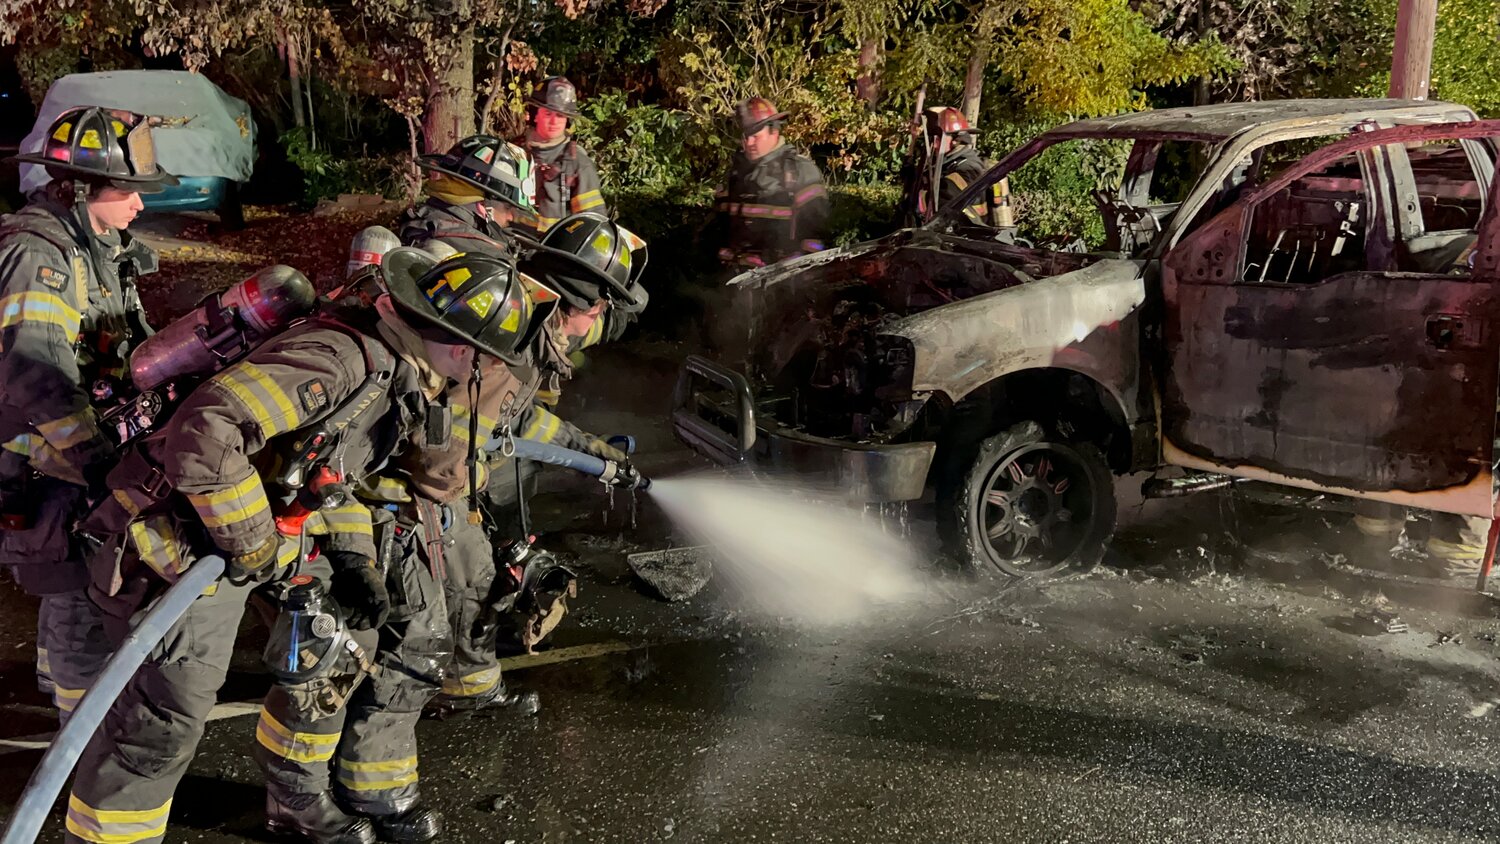 The pickup truck was decimated by the fire — but thanks to the quick work of Lynbrook and Malverne firefighters, no one got hurt.